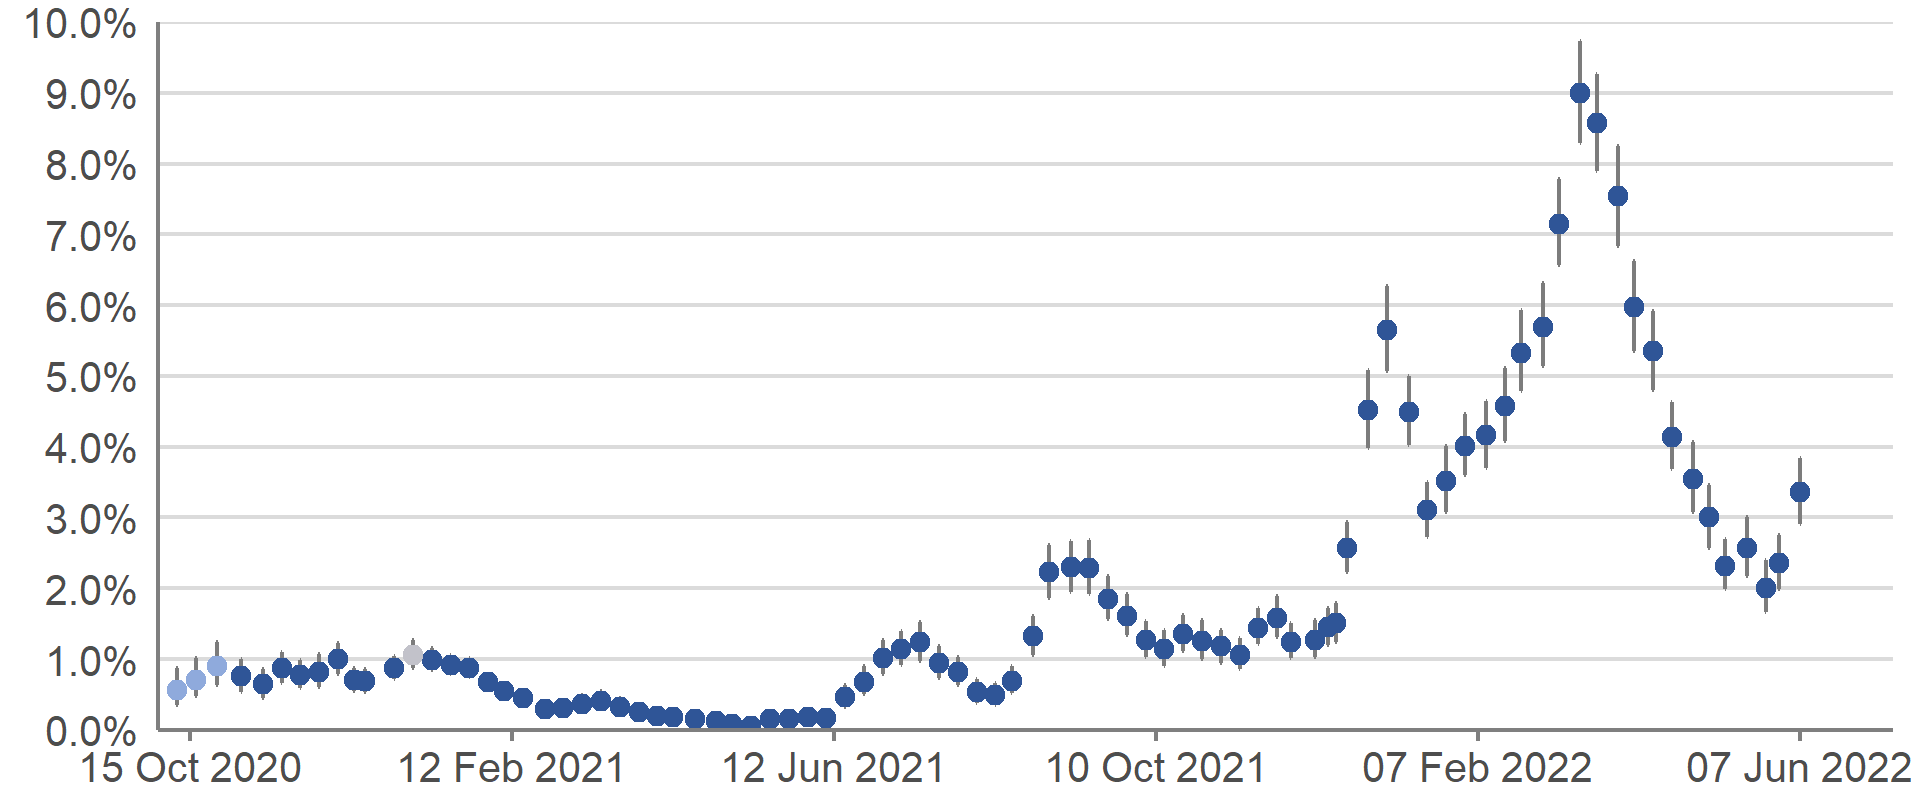 A scatter chart showing official weekly reported estimates of the percentage of the population in Scotland testing positive for COVID-19 between 3 October 2020 and 10 June 2022. Pale blue circles denote 14-day weighted estimates, dark blue circles denote official reported weekly estimates and whiskers show the 95% credible intervals. The estimates peaked in mid-March 2022 and then decreased until early-May. In the most recent week, the percentage of people testing positive for COVID-19 has increased.